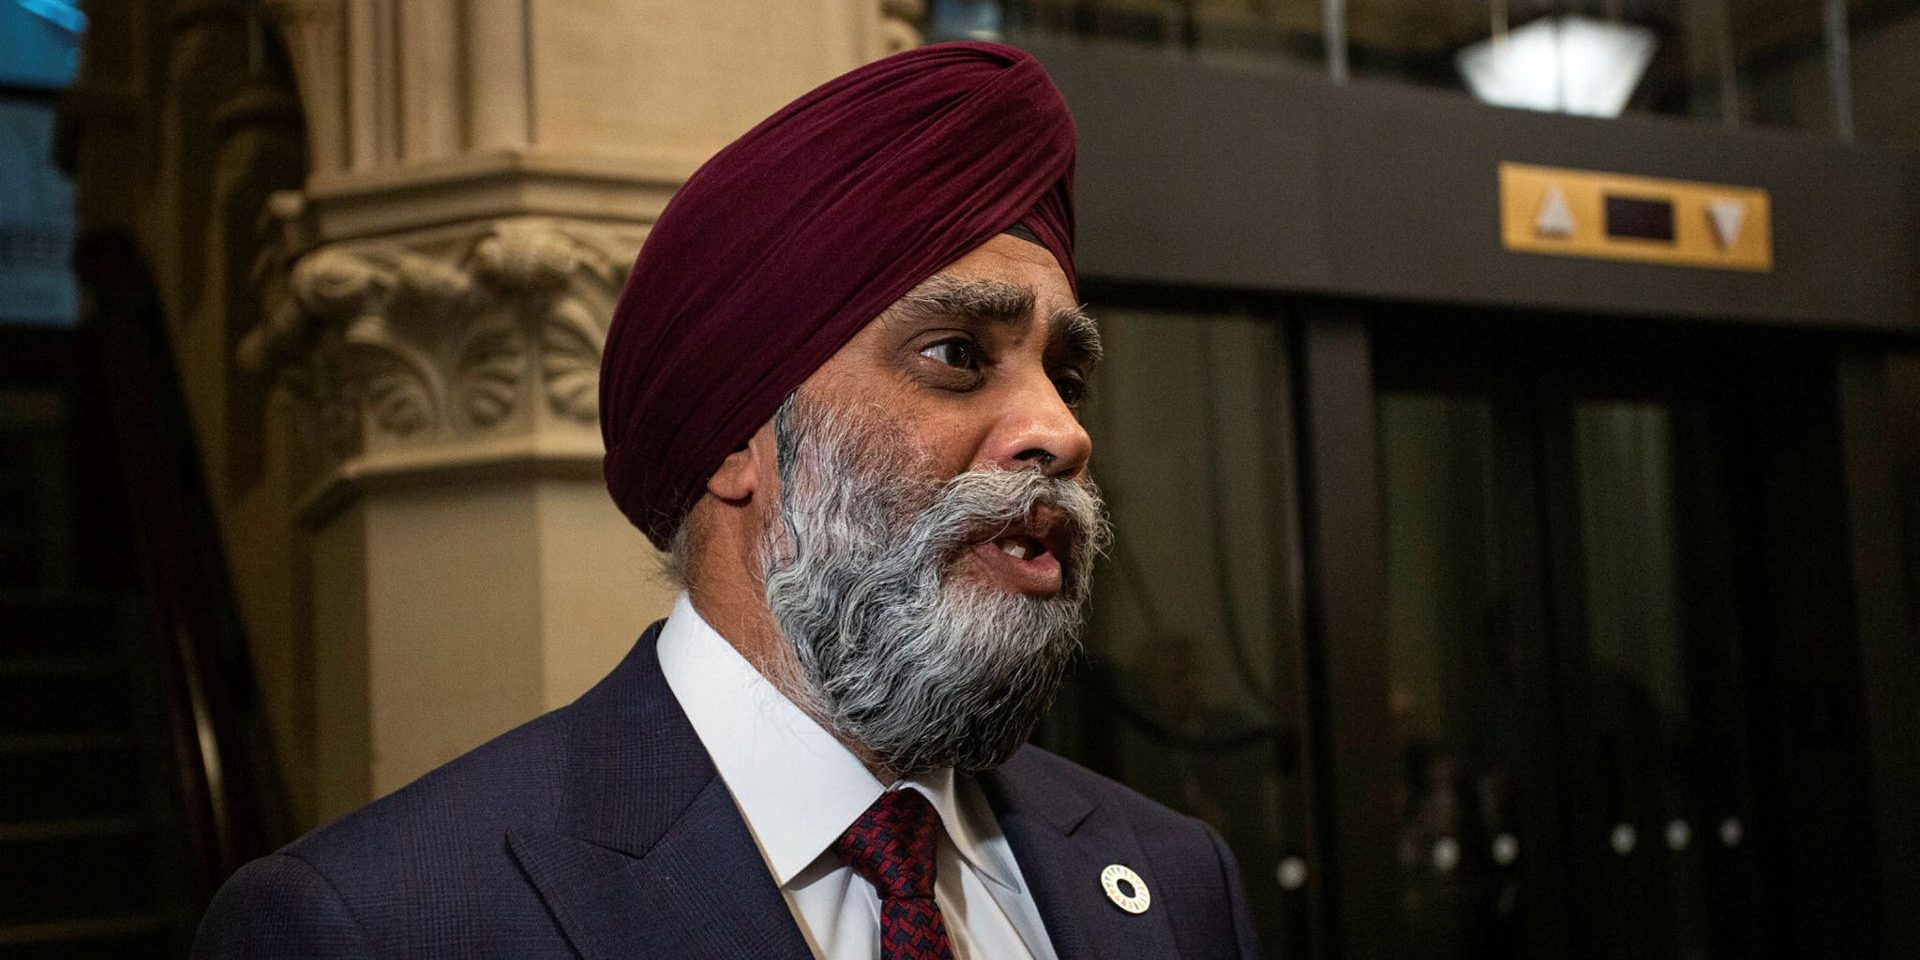 International Development Minister Harjit Sajjan, seen here in West Block on Oct. 26, will meet with senior representatives of the United States, Mexico, and the host nation while visiting Qatar for the FIFA men's World Cup. The Hill Times photograph by Andrew Meade